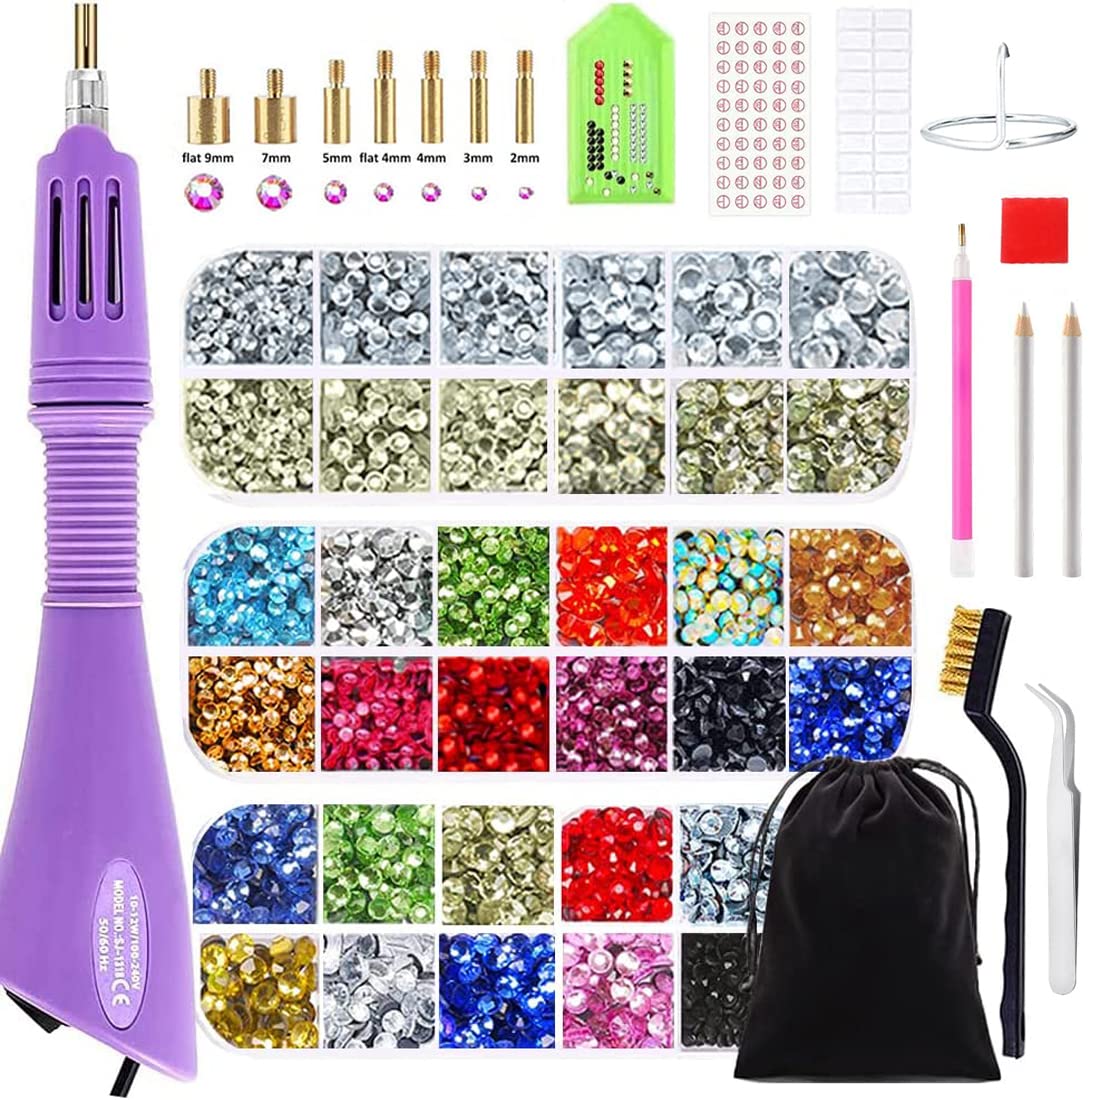 Epesl Bedazzler Kit with Rhinestones, Hot Fixed Gems Craft